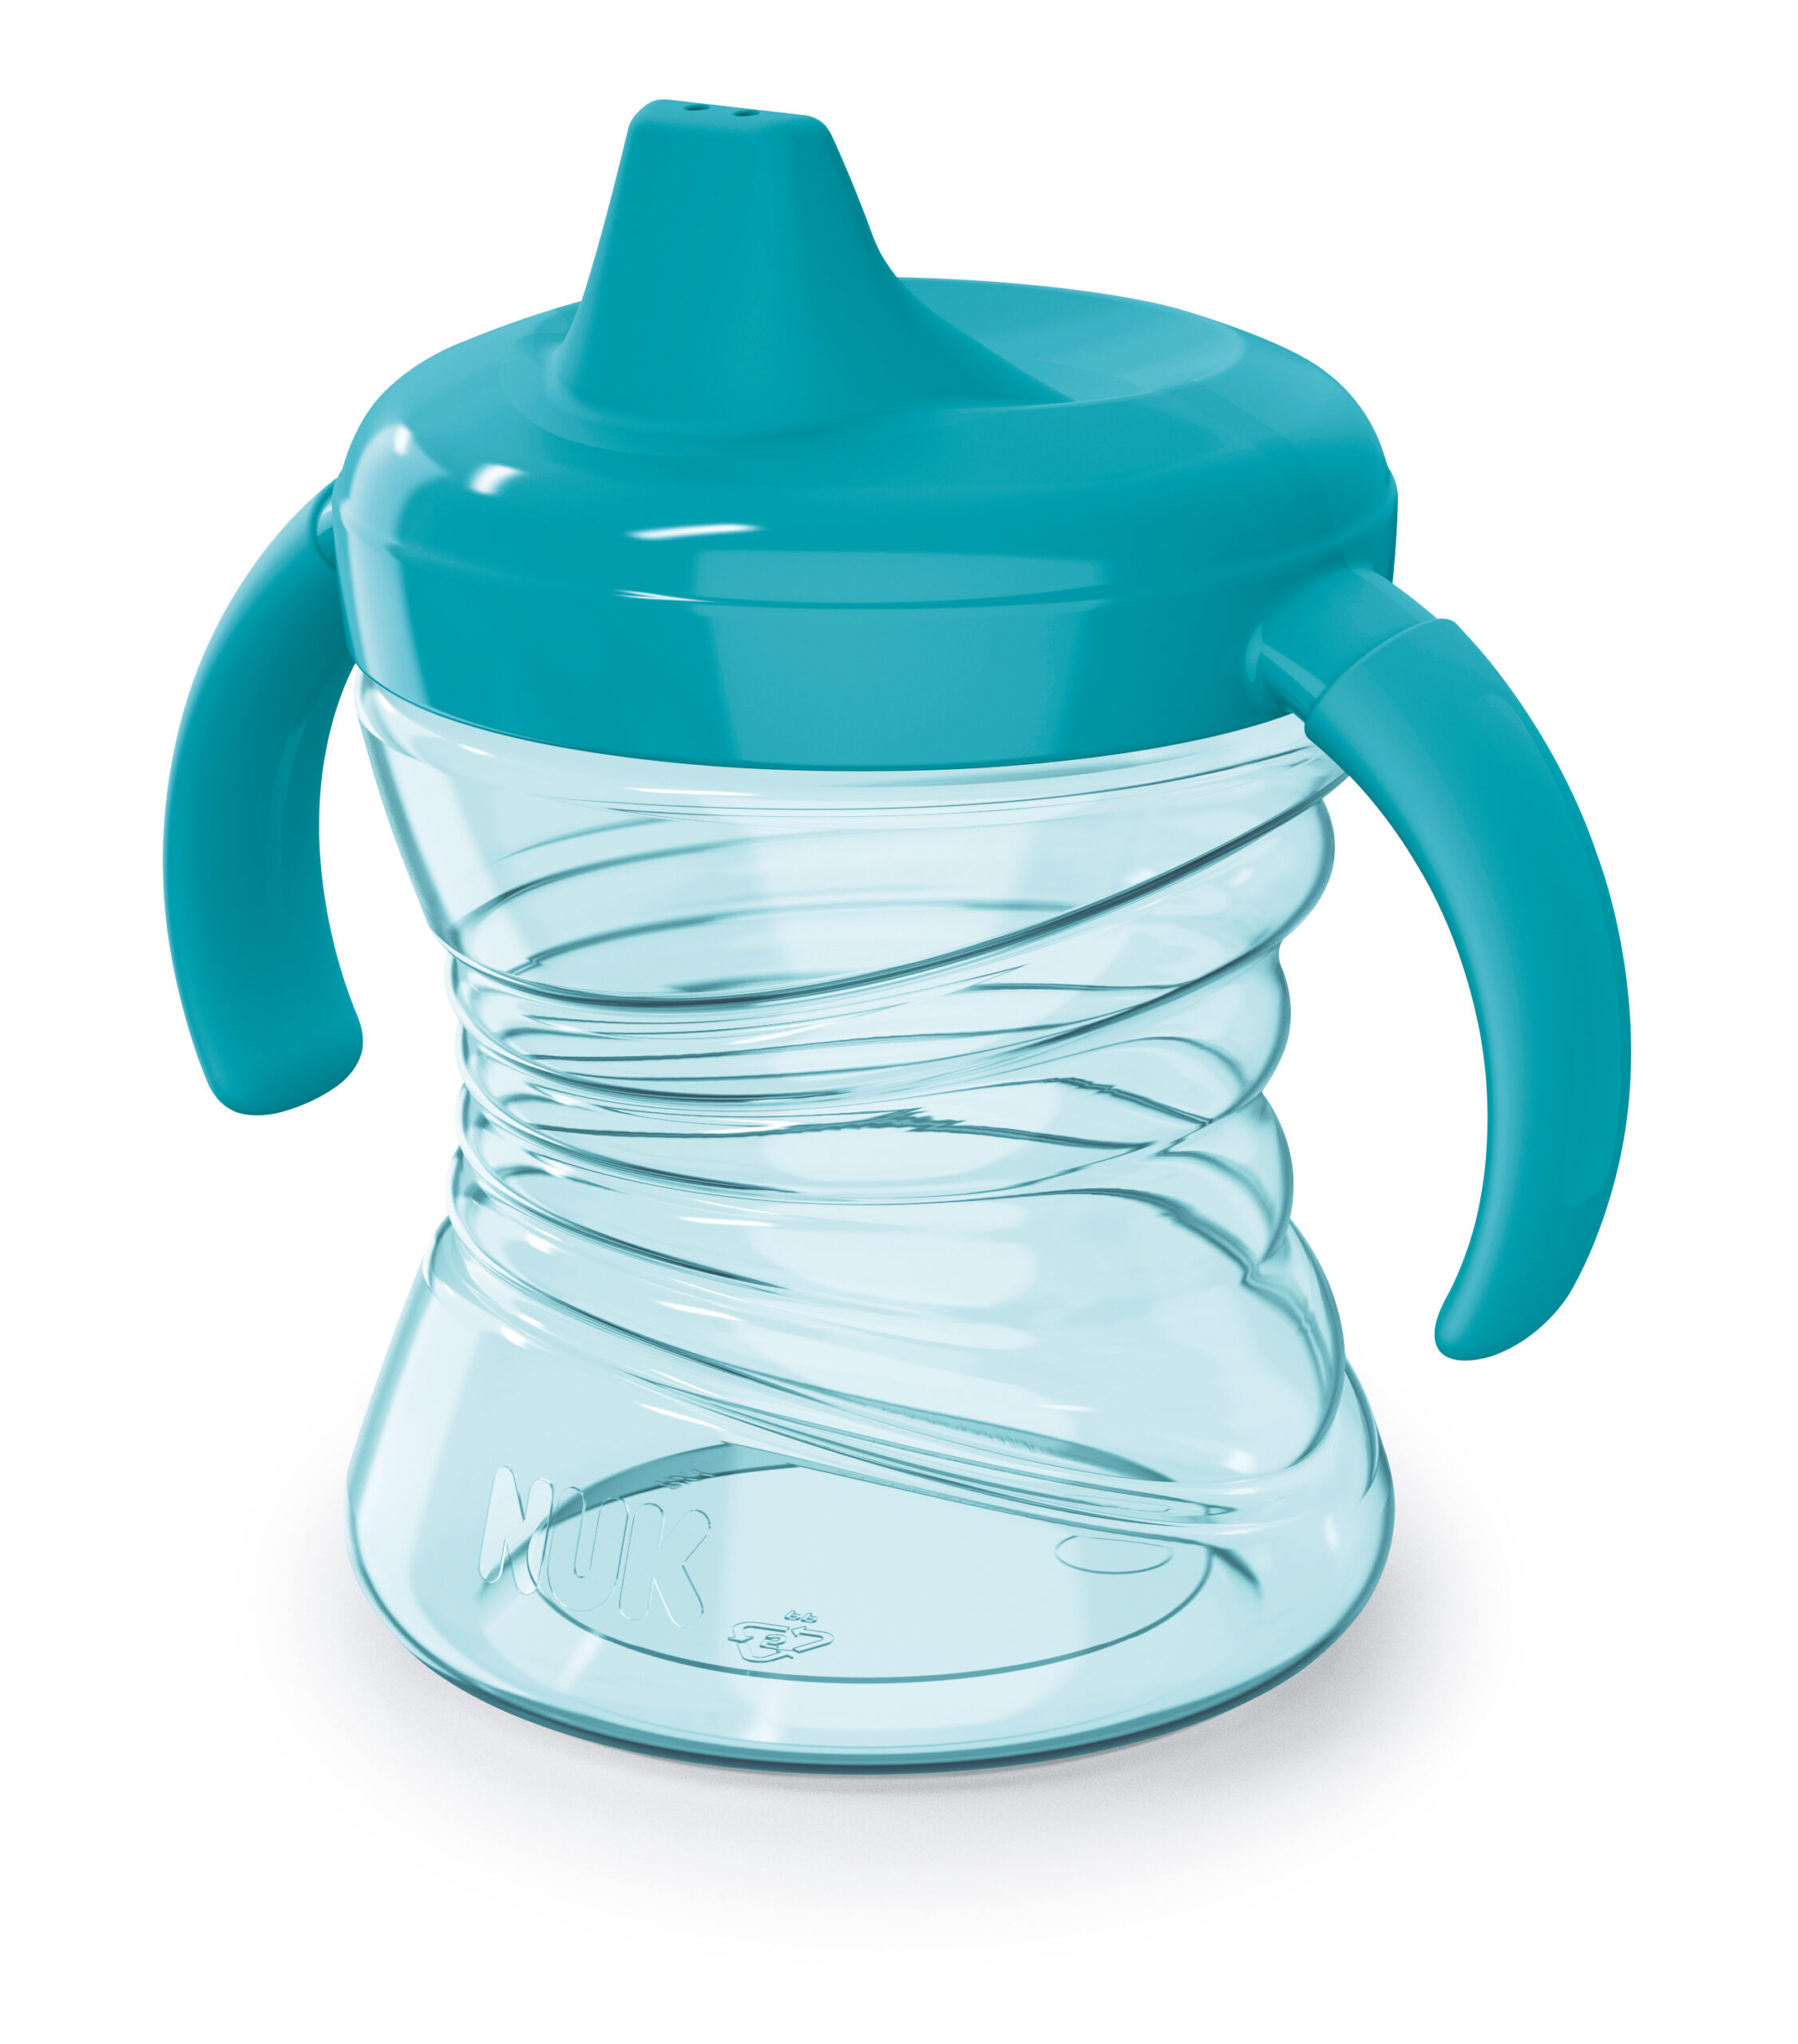 NUK® Fun Grips Hard Spout Sippy Cup, 10OZ Product Image 2 of 7